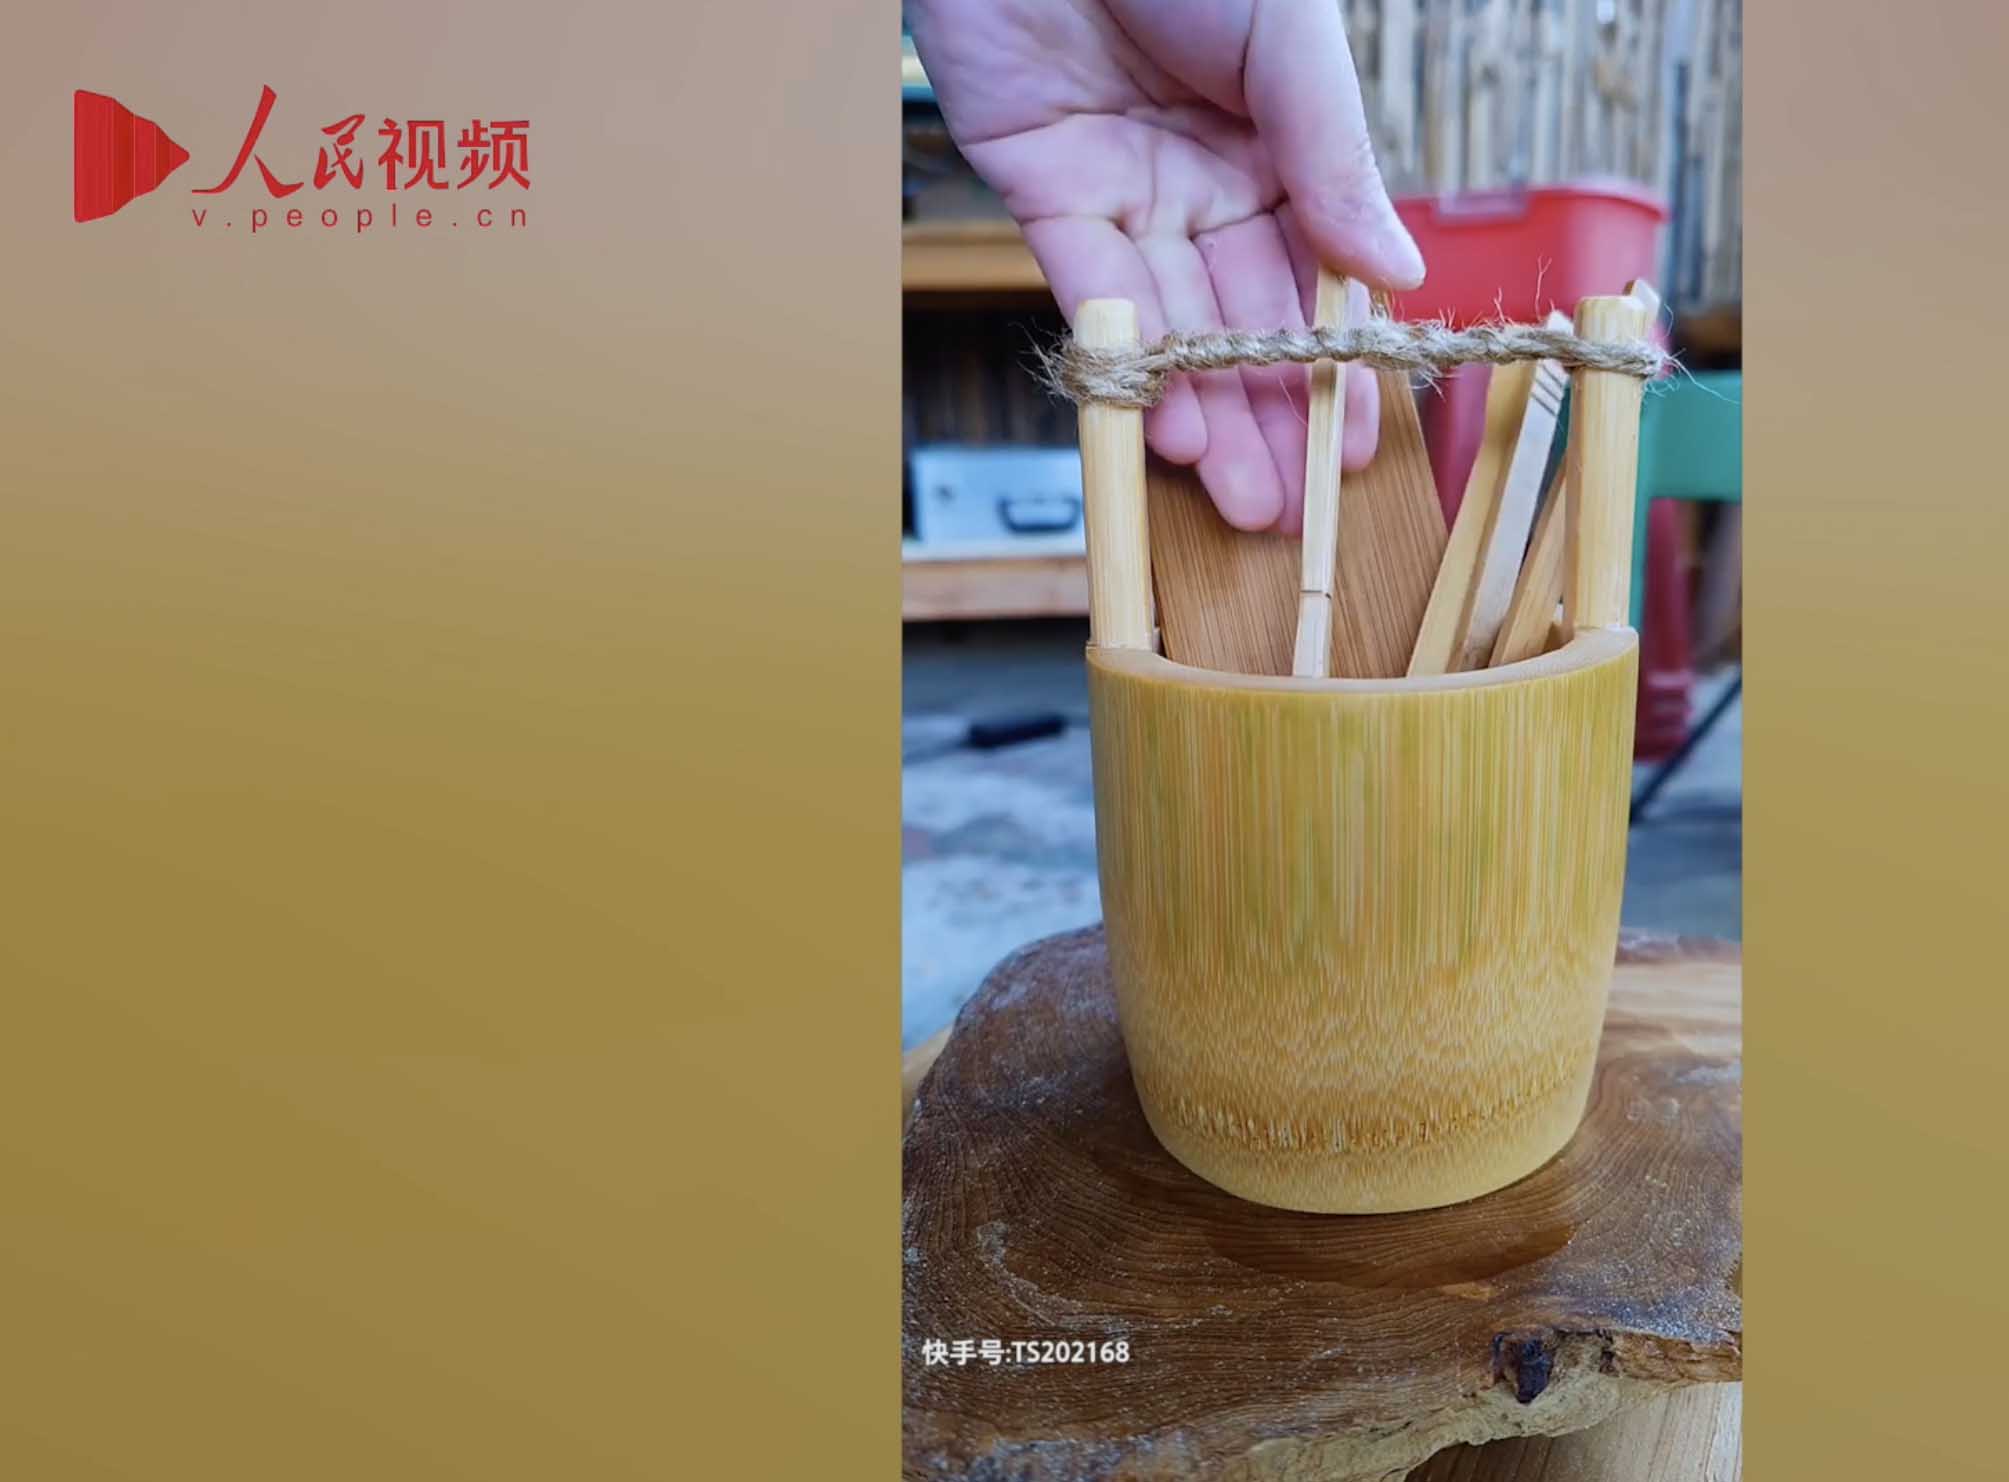 Appreciate exquisite bamboo crafts of modern and ancient China